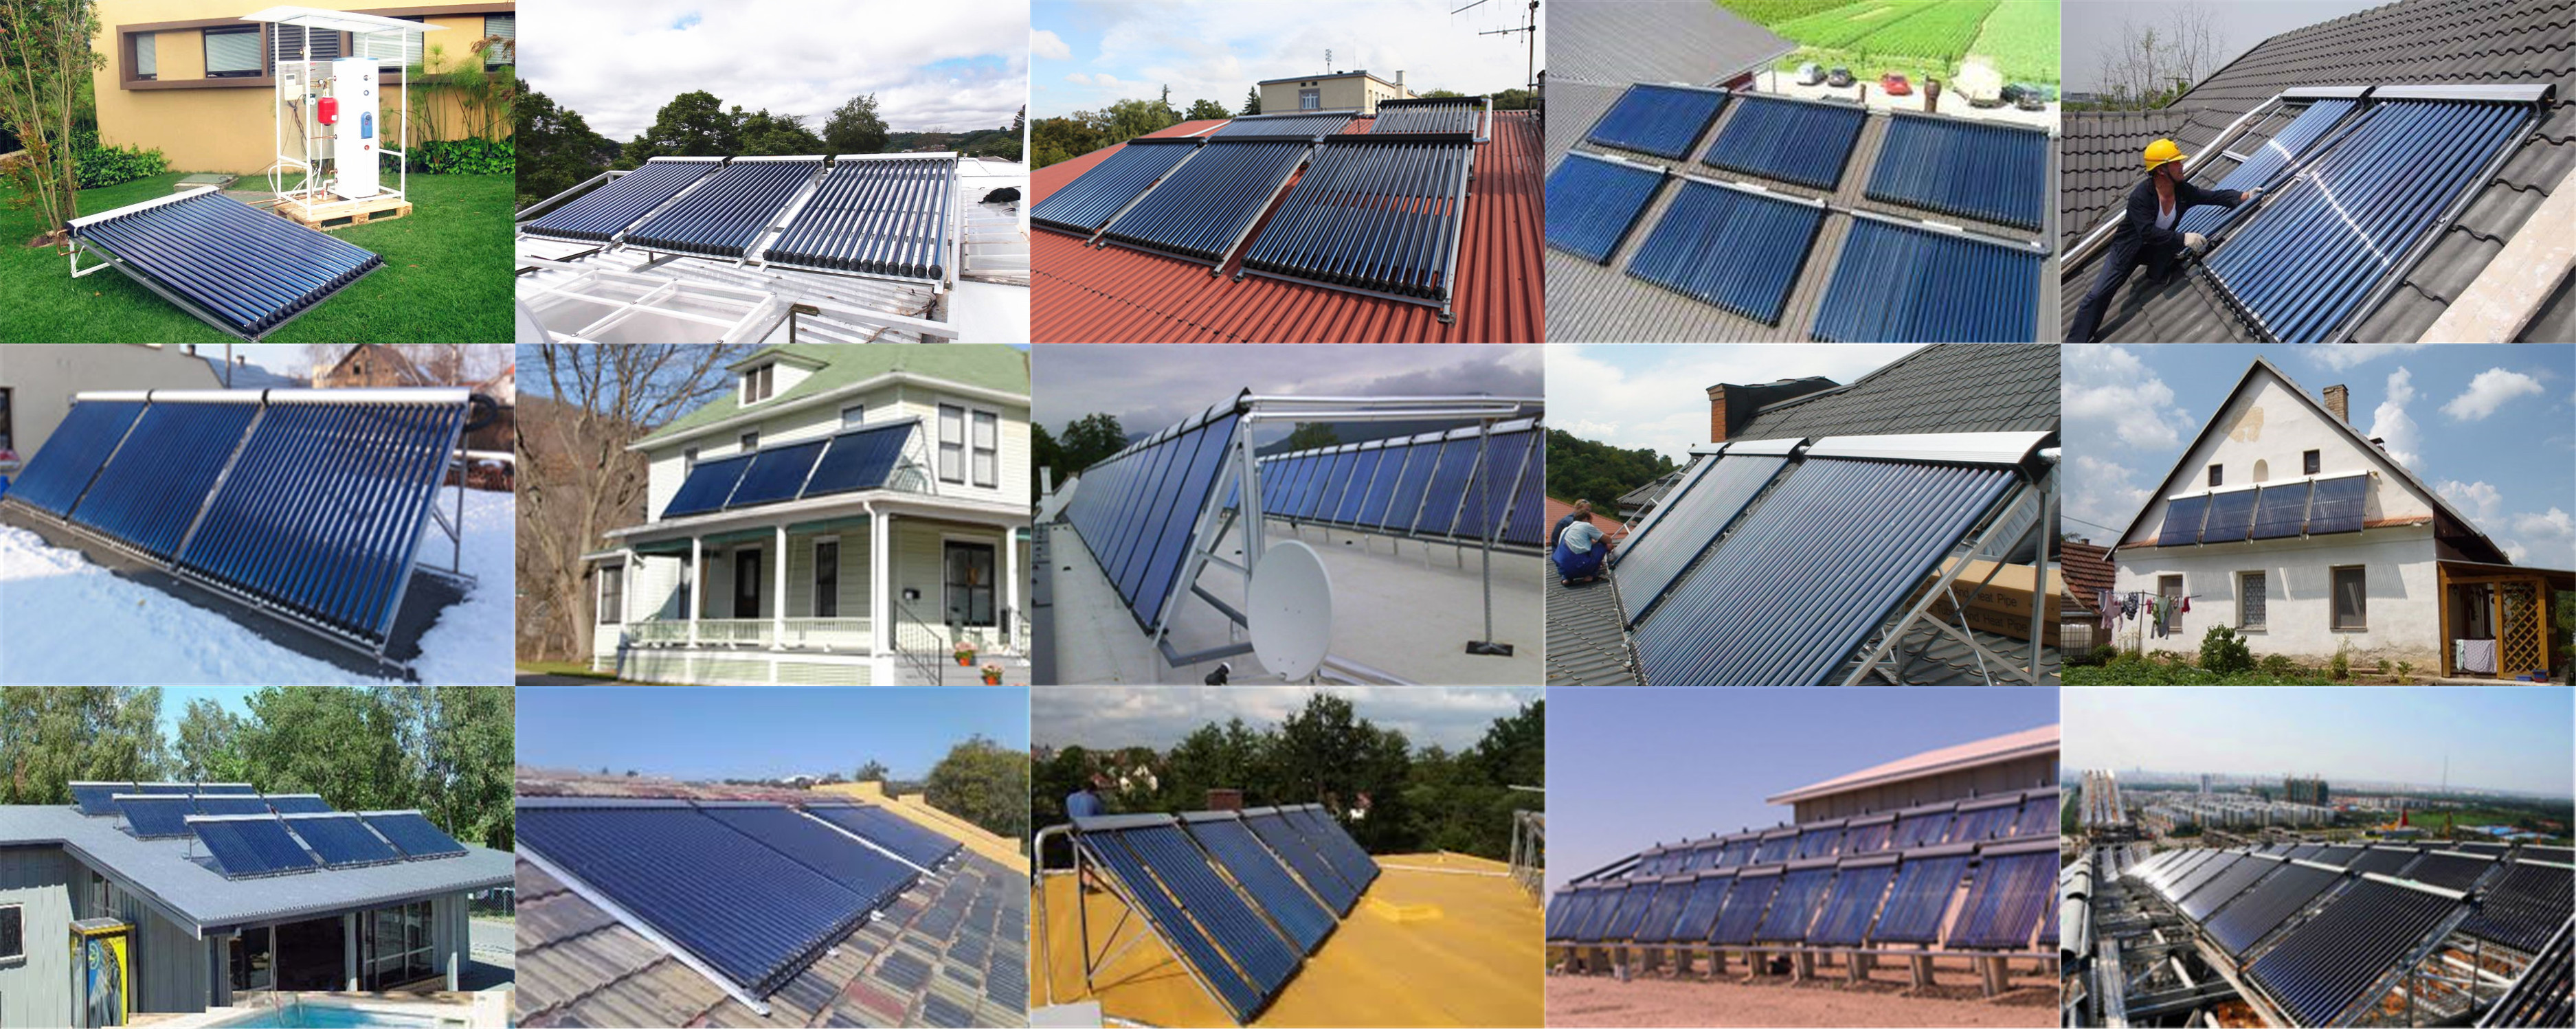 Zhejiang import balcony heat pipe seperate pressure solar water heater energy home solar system